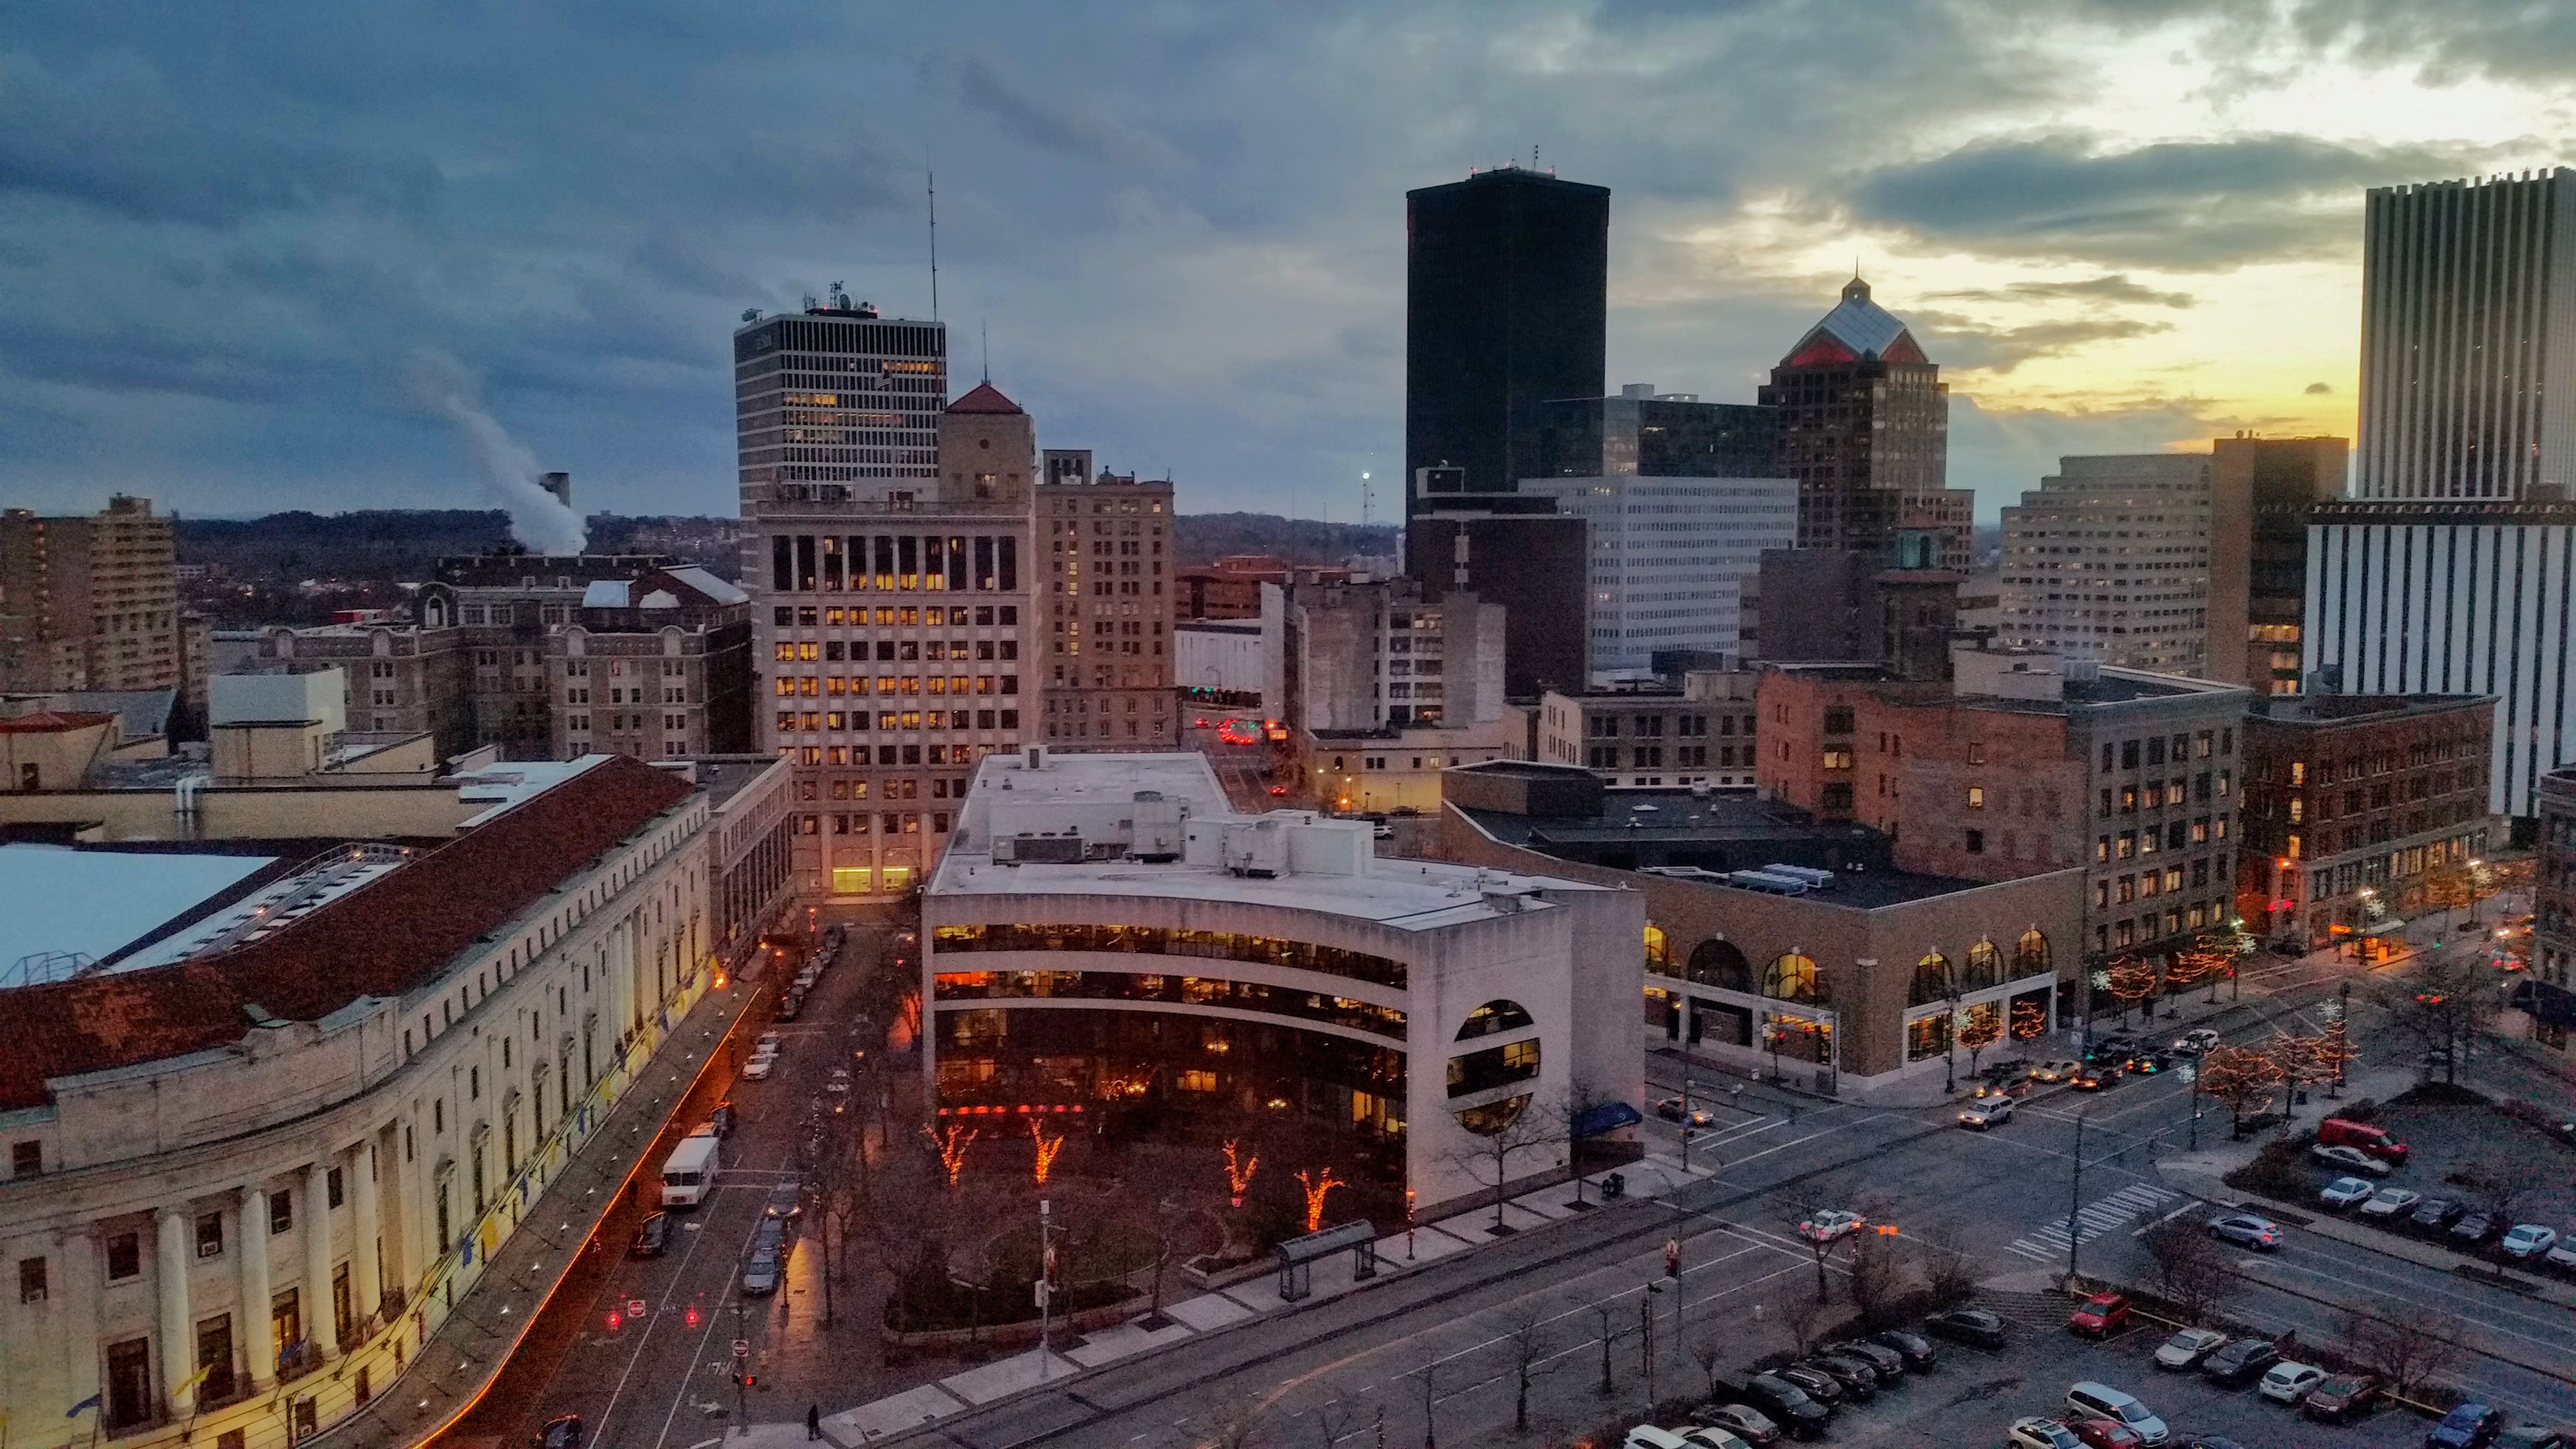 view of eastman theater and surrounding area lit up at sunset